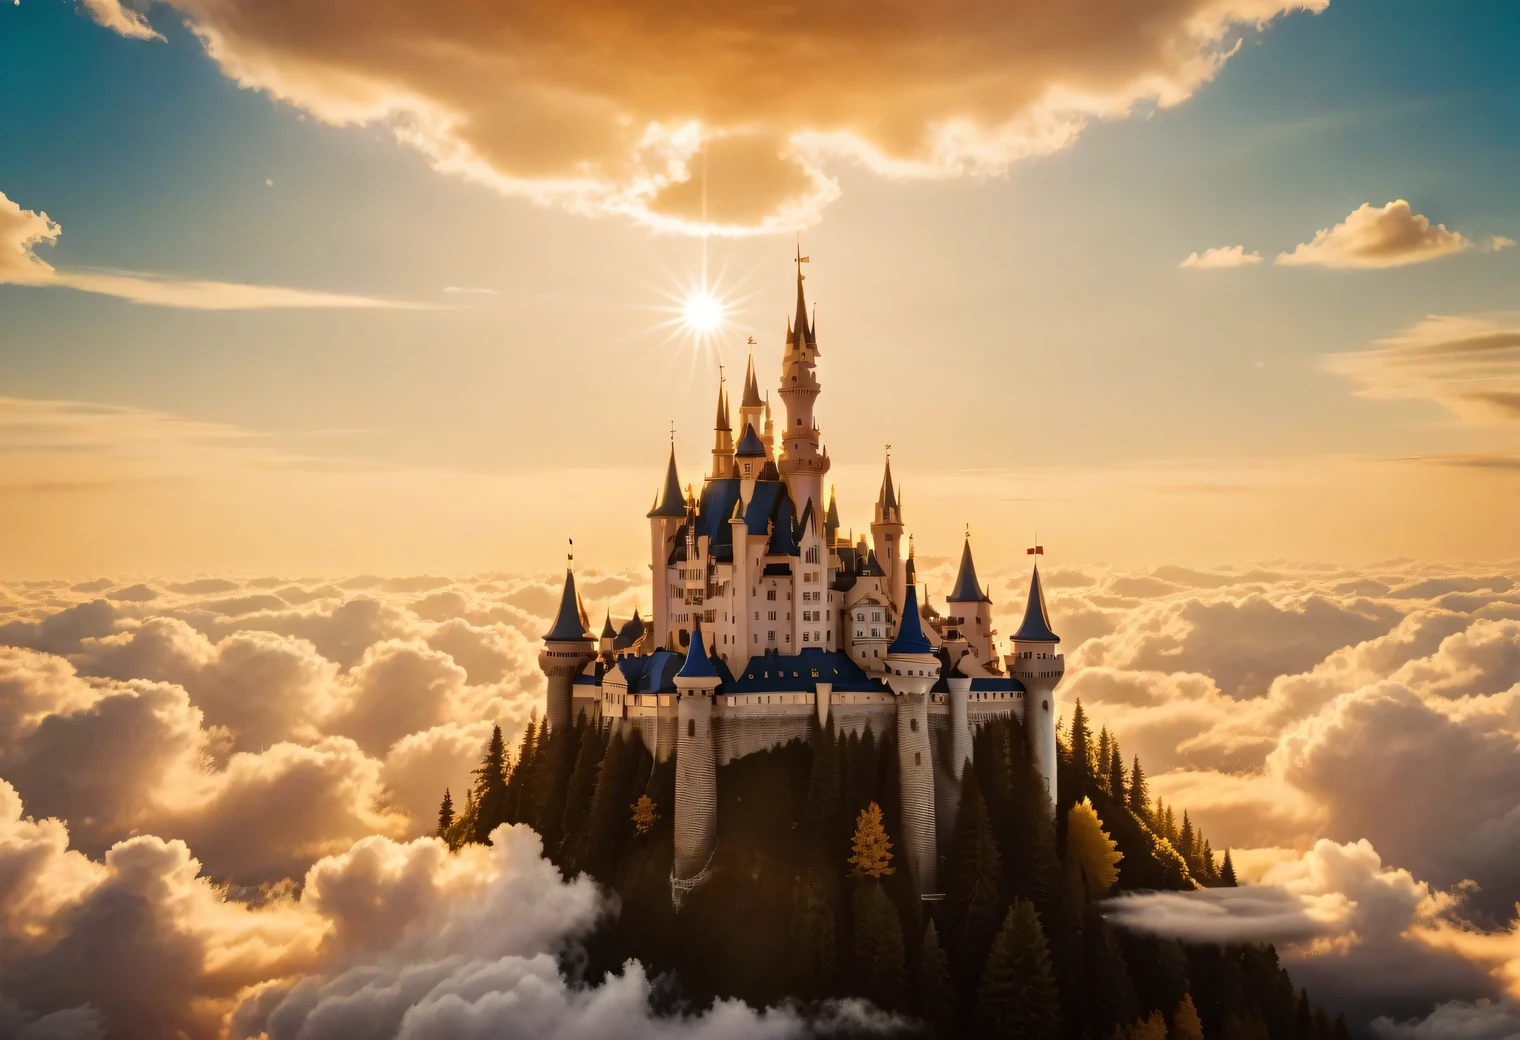 Analog photography, there is a shining Dream Castle in the sky among the clouds, Dream Castle is very beautiful and exquisite surrounded by clouds and golden radiance and golden light, rays of golden light radiate from Dream Castle, realistic, detailed, high resolution, 32k,analog photo